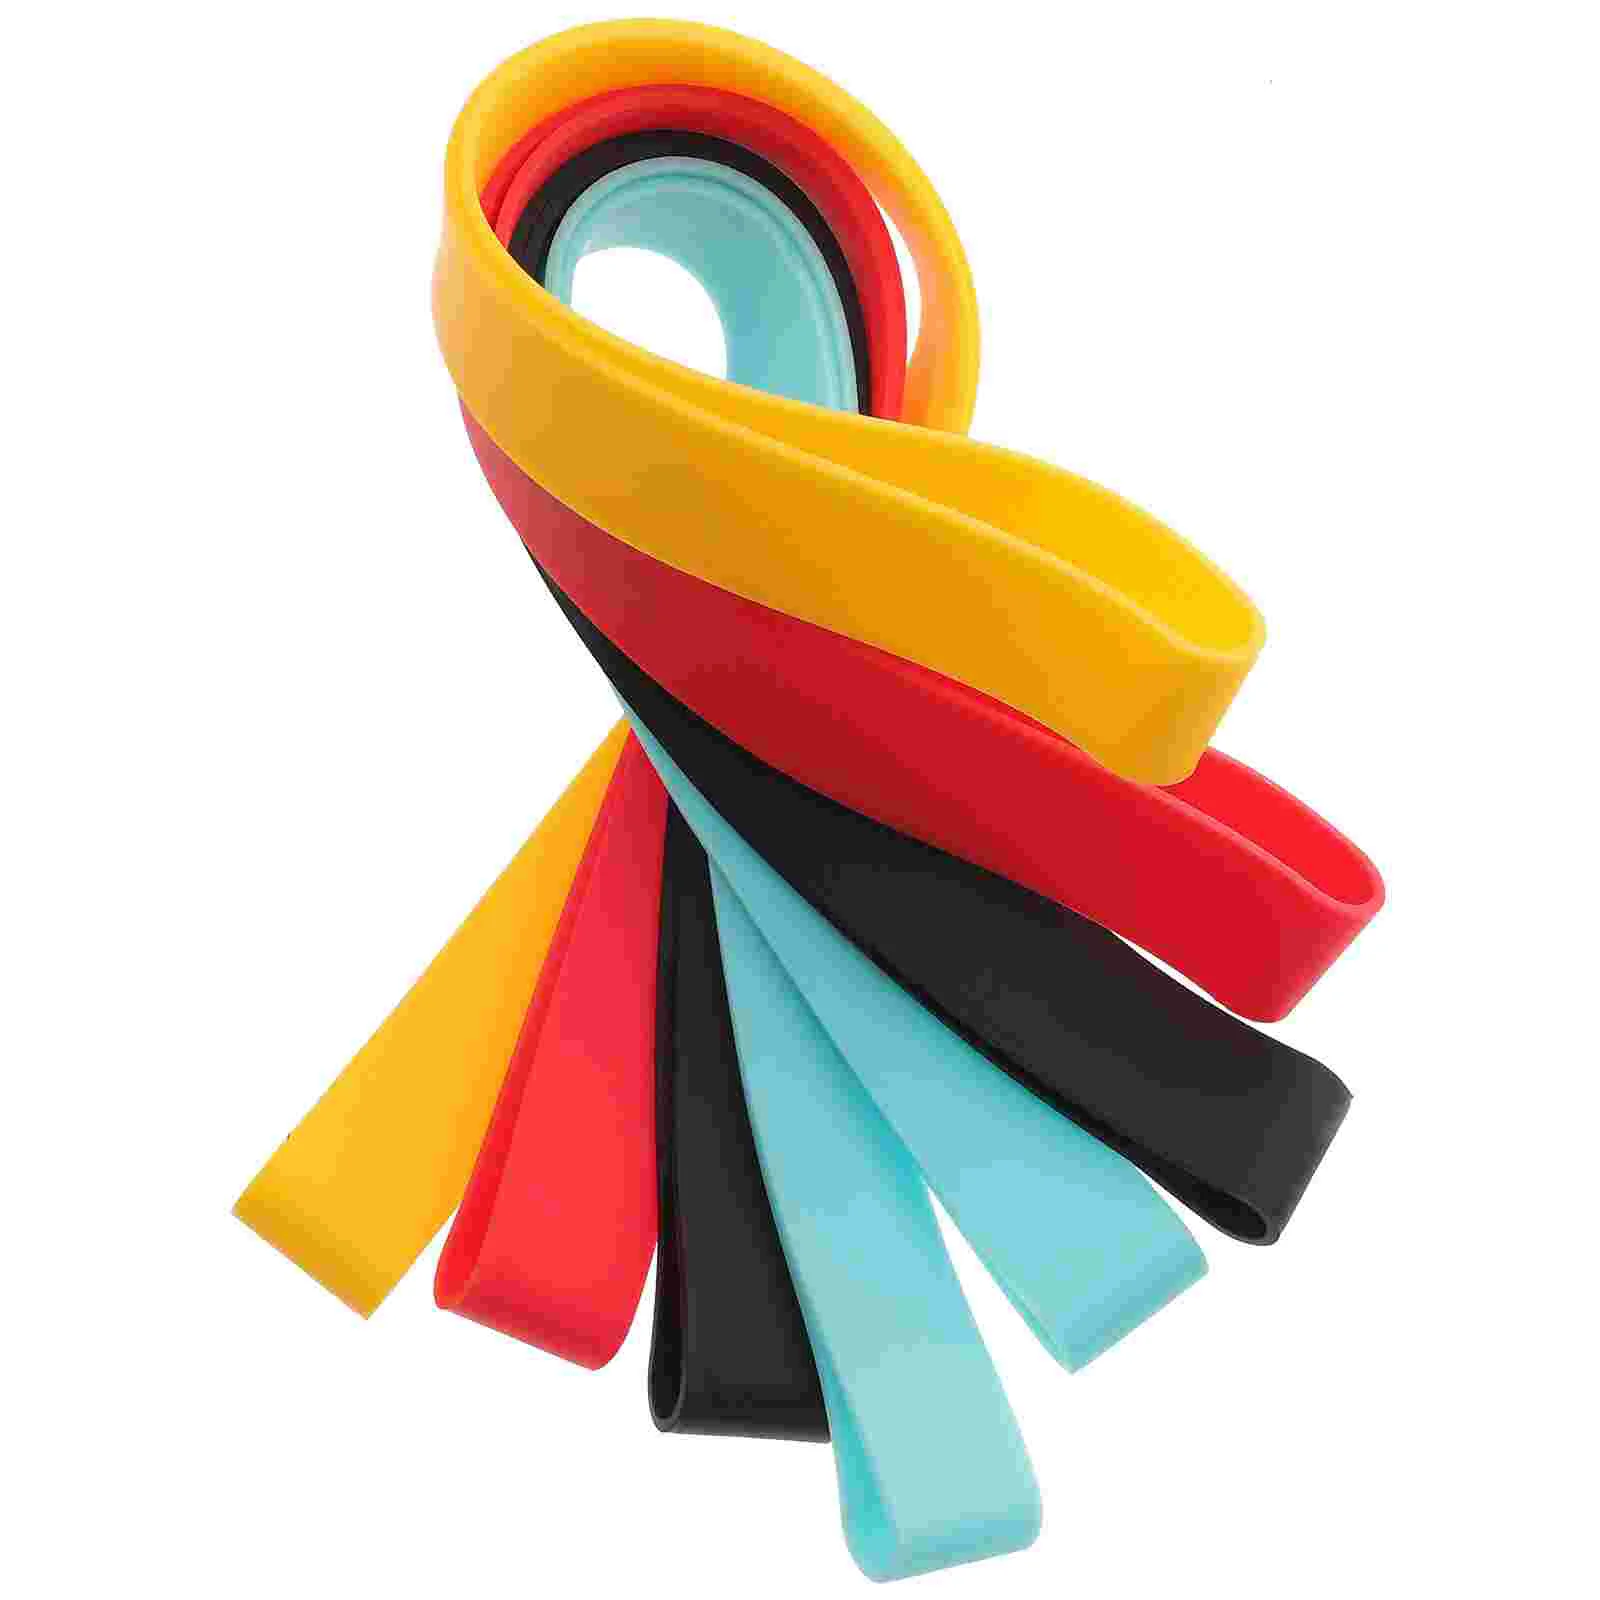 

4 Pcs Beach Towel Clips Entrained Cruise Bands Strap Silicone Fixing Ship Essentials Silica Gel Chairs Stretchable